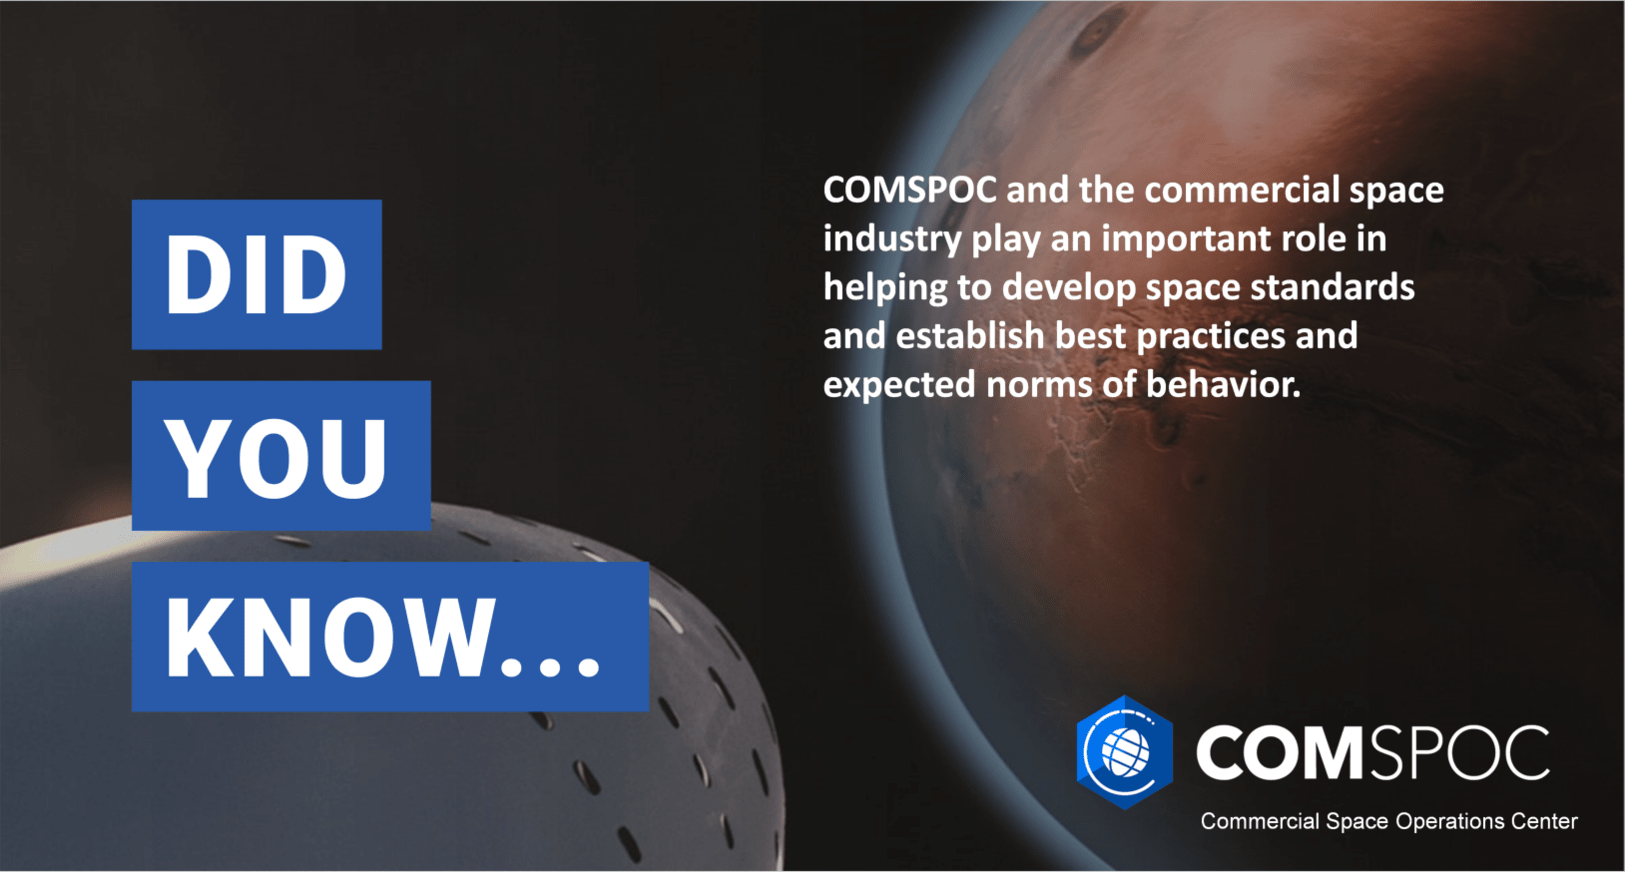 Did You Know: COMSPOC and the commercial space industry play an improtrant role in helping to develop space standards and establish best practices and expected norms of behavior.